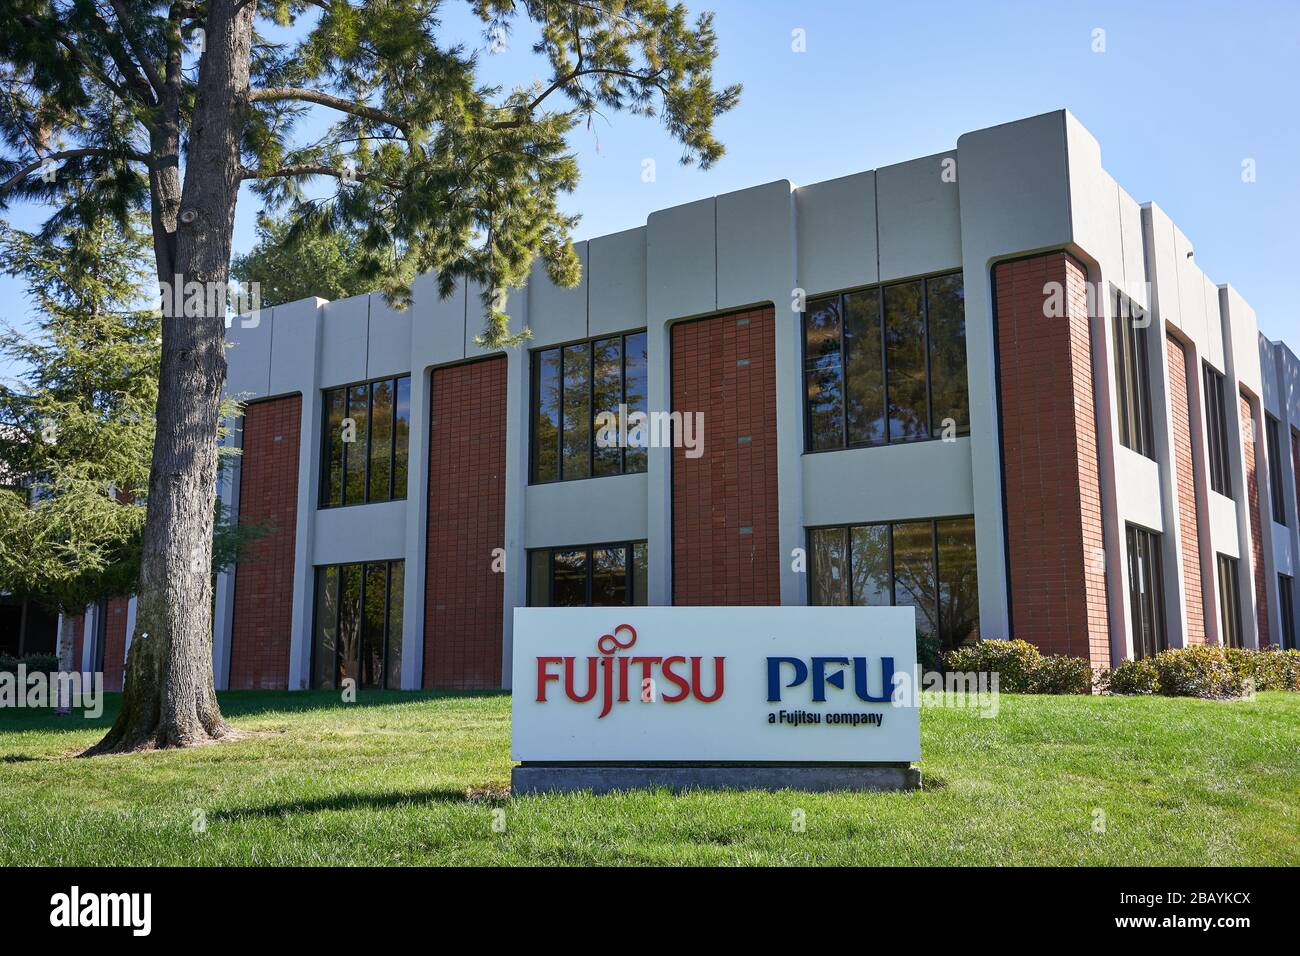 PFU America Headquarters in Sunnyvale, California. PFU Limited is a Japanese information technology company and a wholly owned subsidiary of Fujitsu. Stock Photo